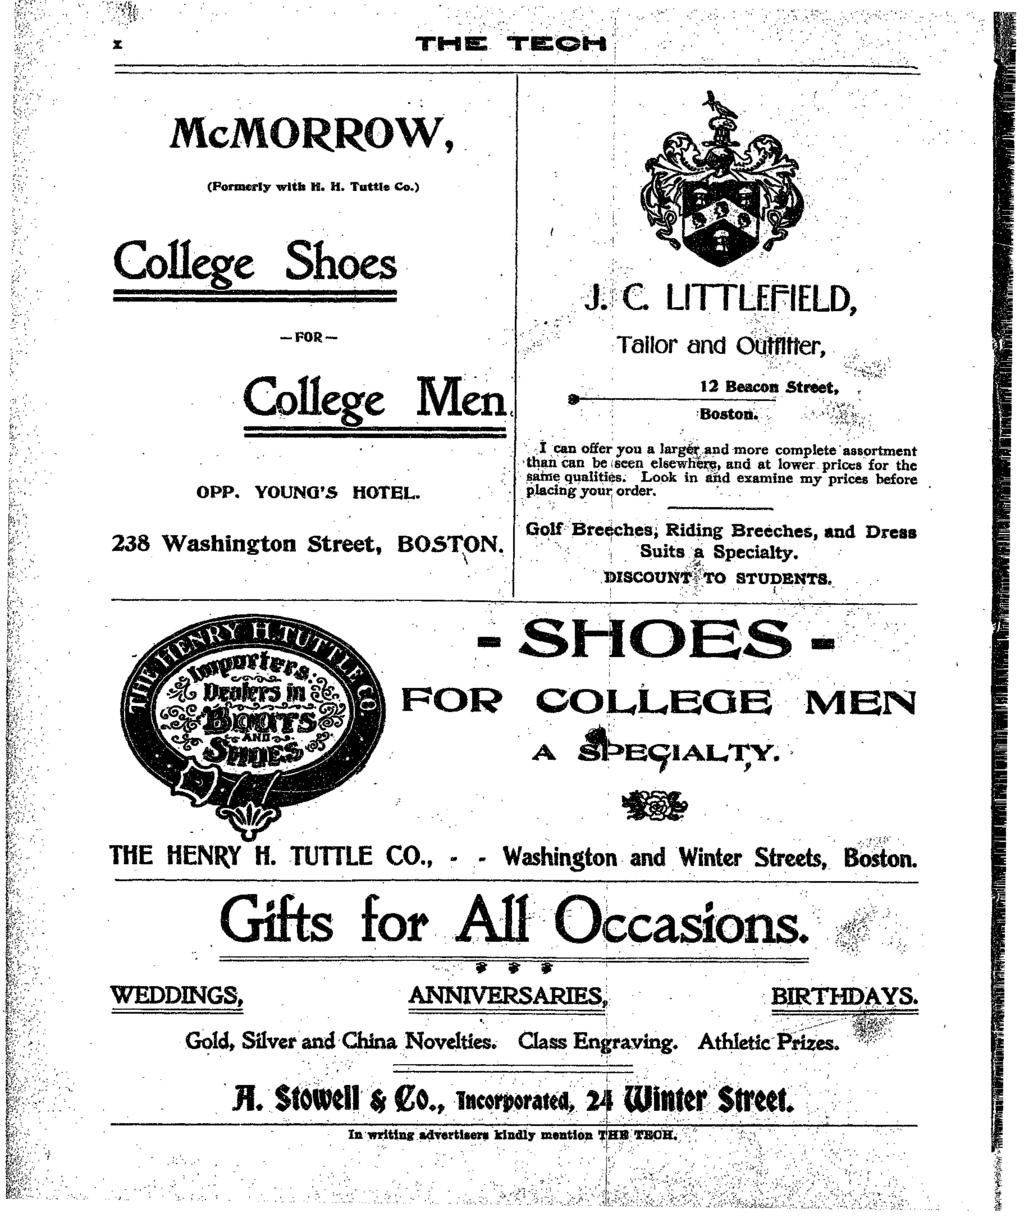 : 5' :,. - '.:.f/t -, 'rm E.,T :. E r." j c_ -. ; McAMORROW T "' College (Formerly wth H. H. Tuttle Co.),~~-------- ~~~~ Shoes - FOR -... _... "... OPP. YOUNG'S HOTEL. 238 Washngton Street, BOSTBON.